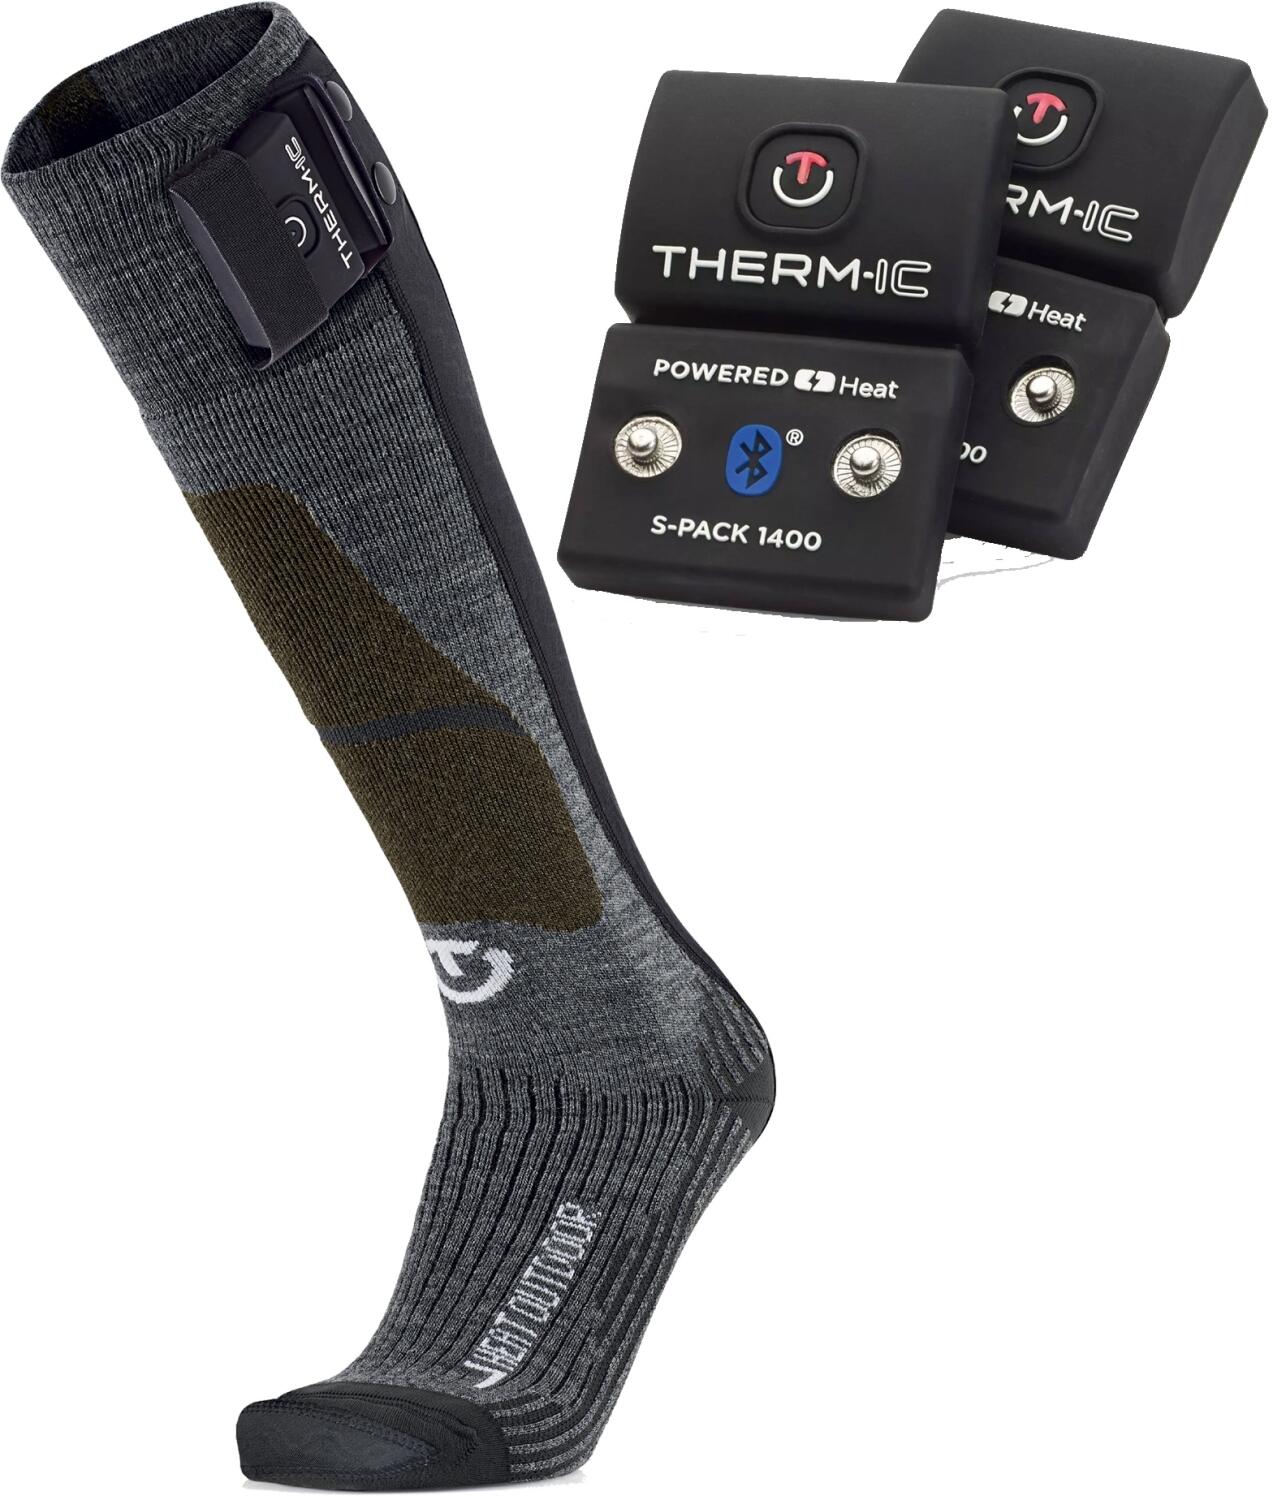 Therm-ic PowerSock Set Heat Fusion Outdoor SPack 1400 BT